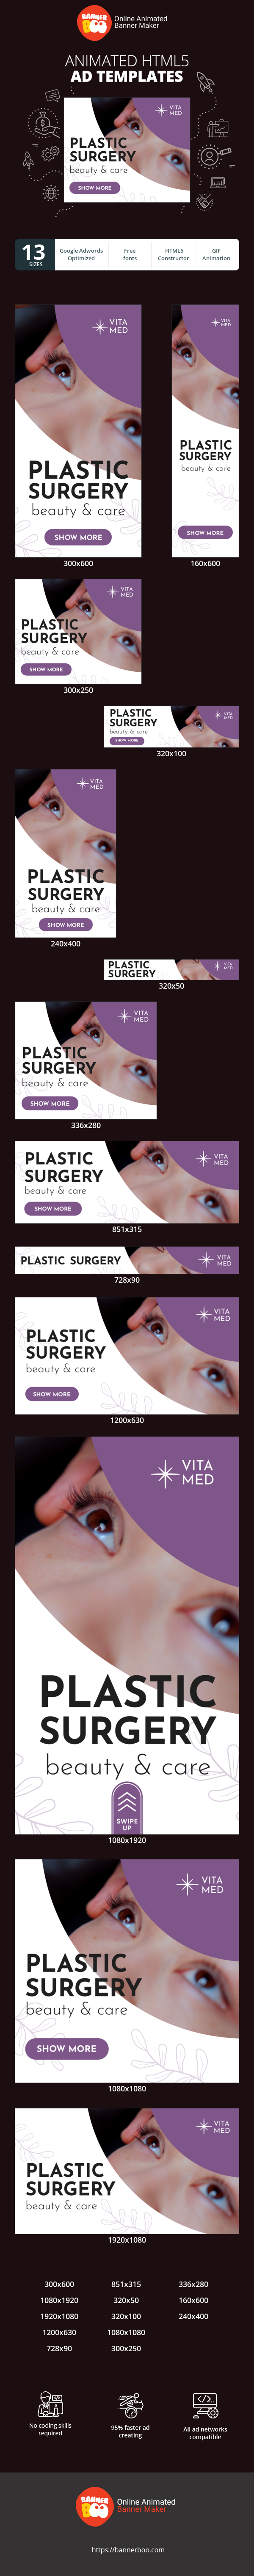 Banner ad template — Plastic Surgery  — Beauty & Care